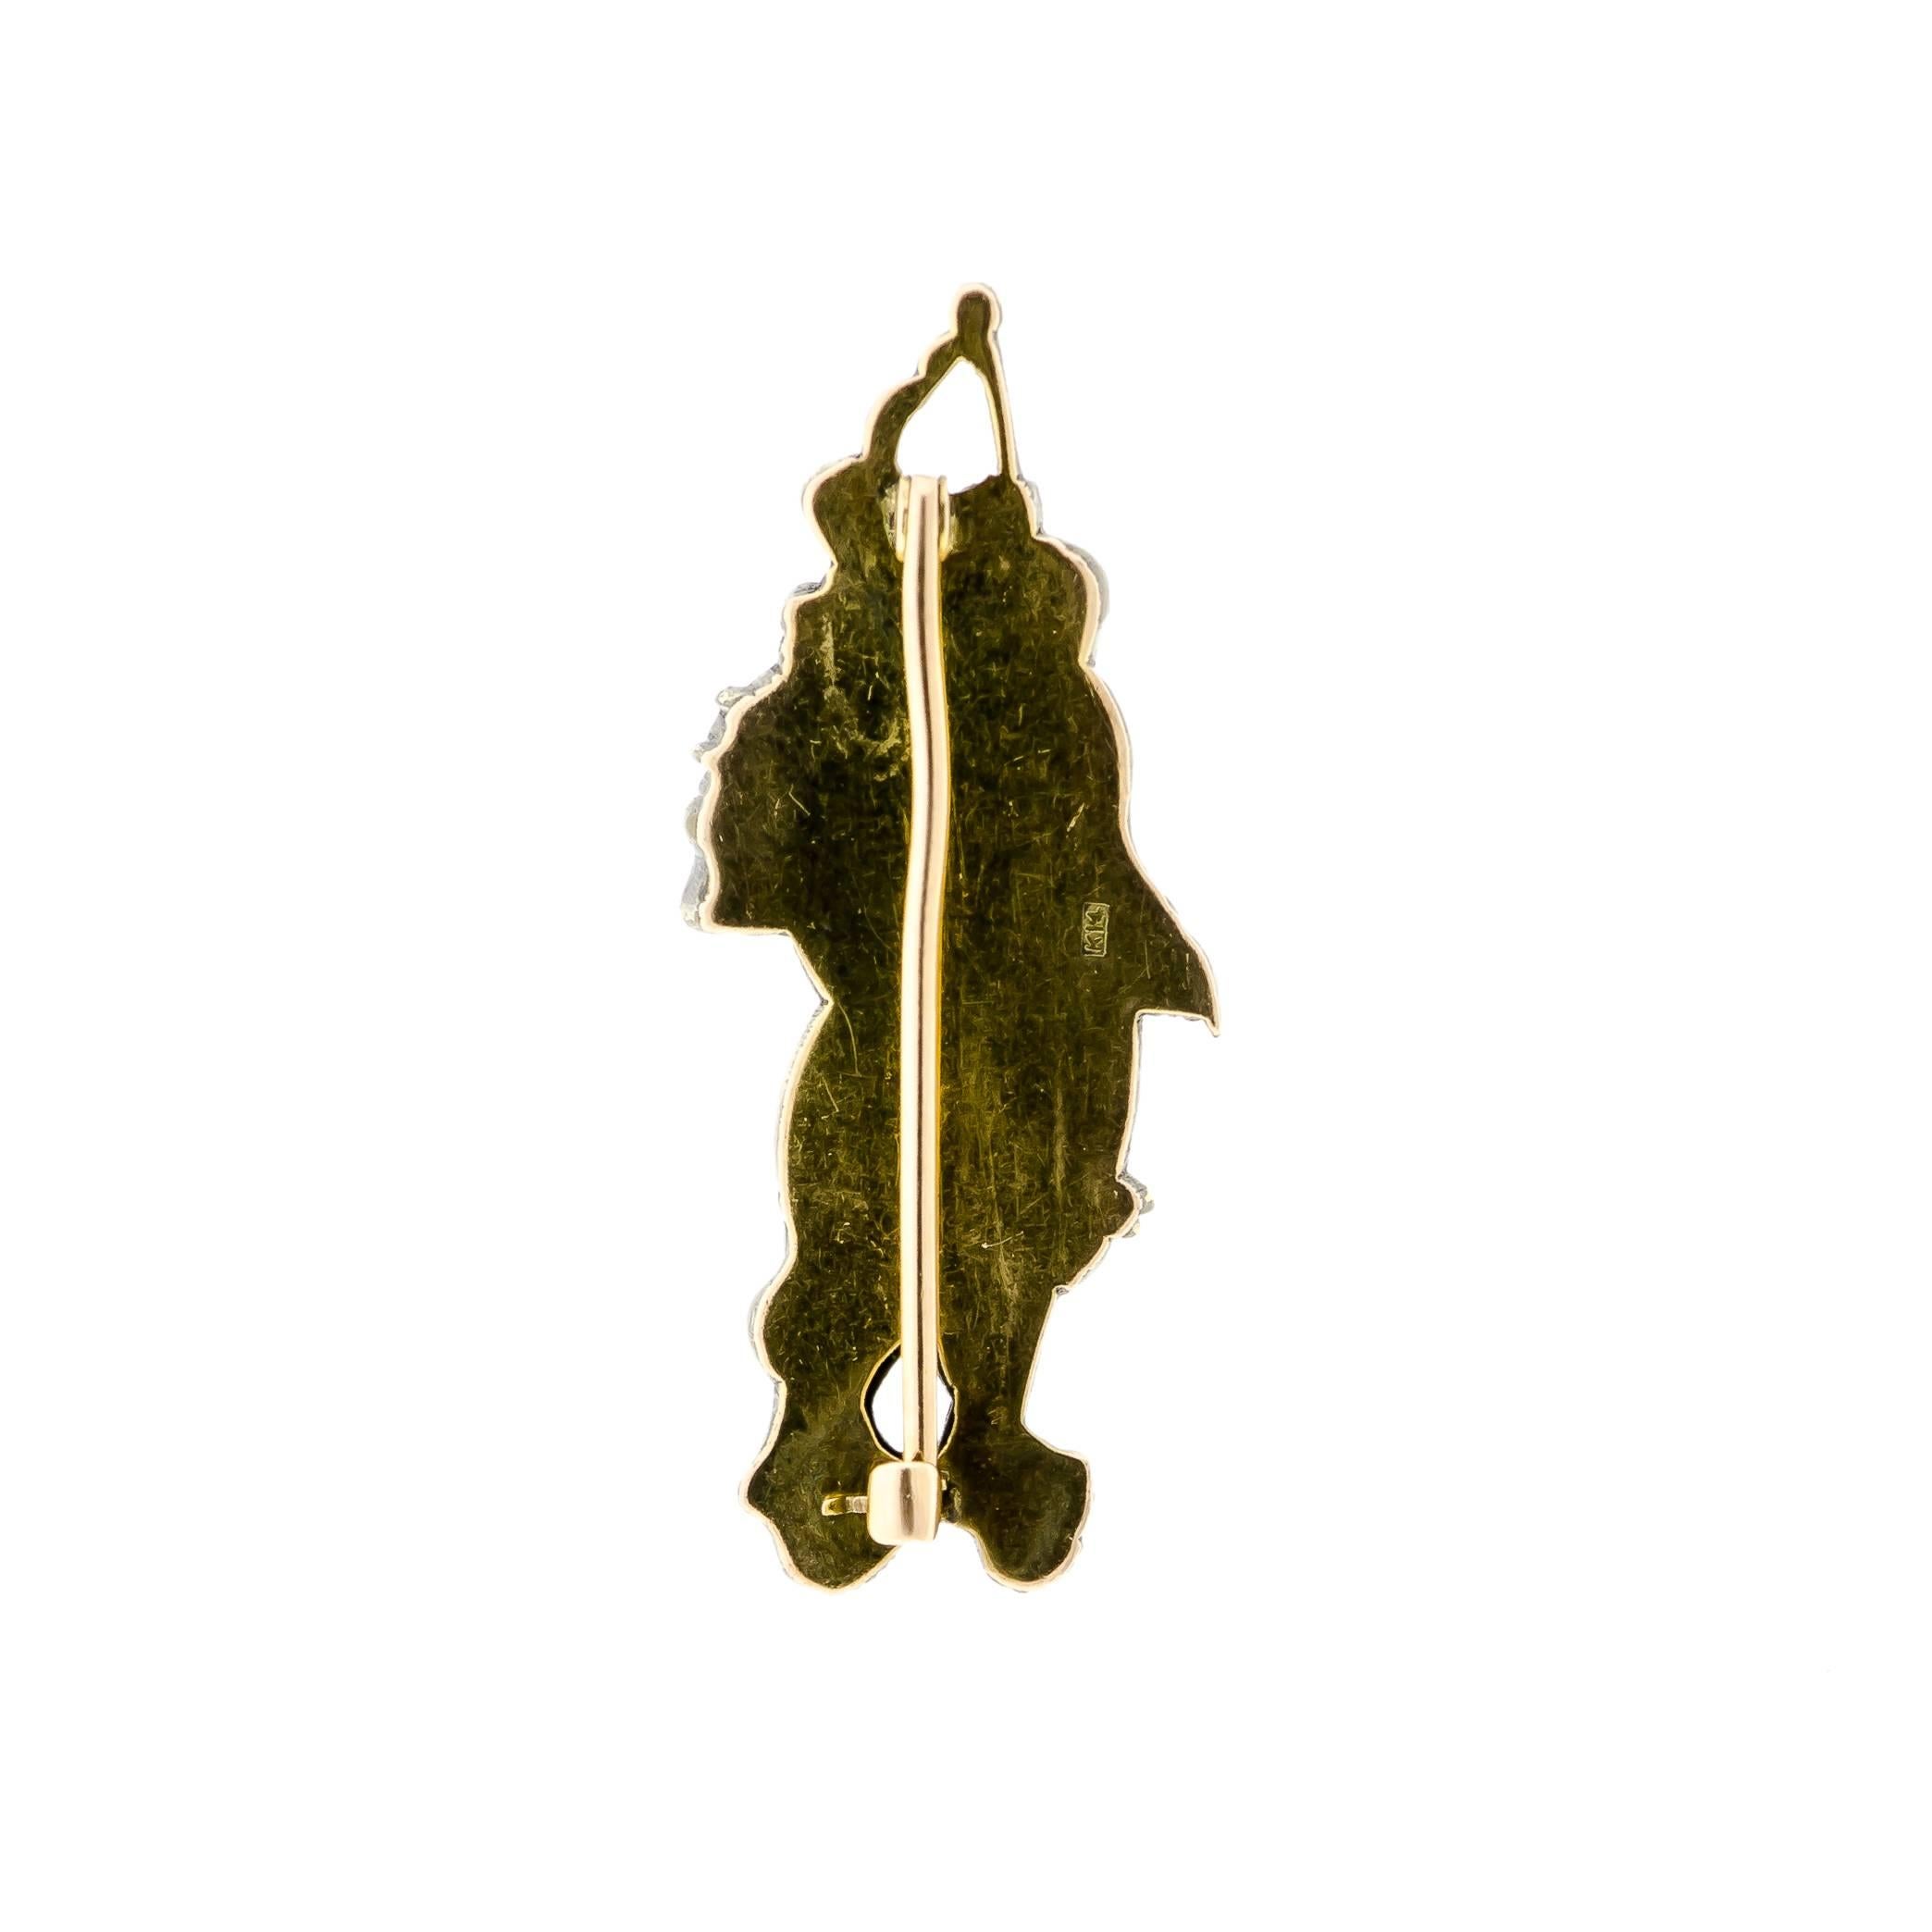 Charming antique Japanese shakudo figural brooch, two figures rendered in Japanese shakudo (mixed alloy of gold copper) on a 14k yellow gold mount - length approx 1 5/8